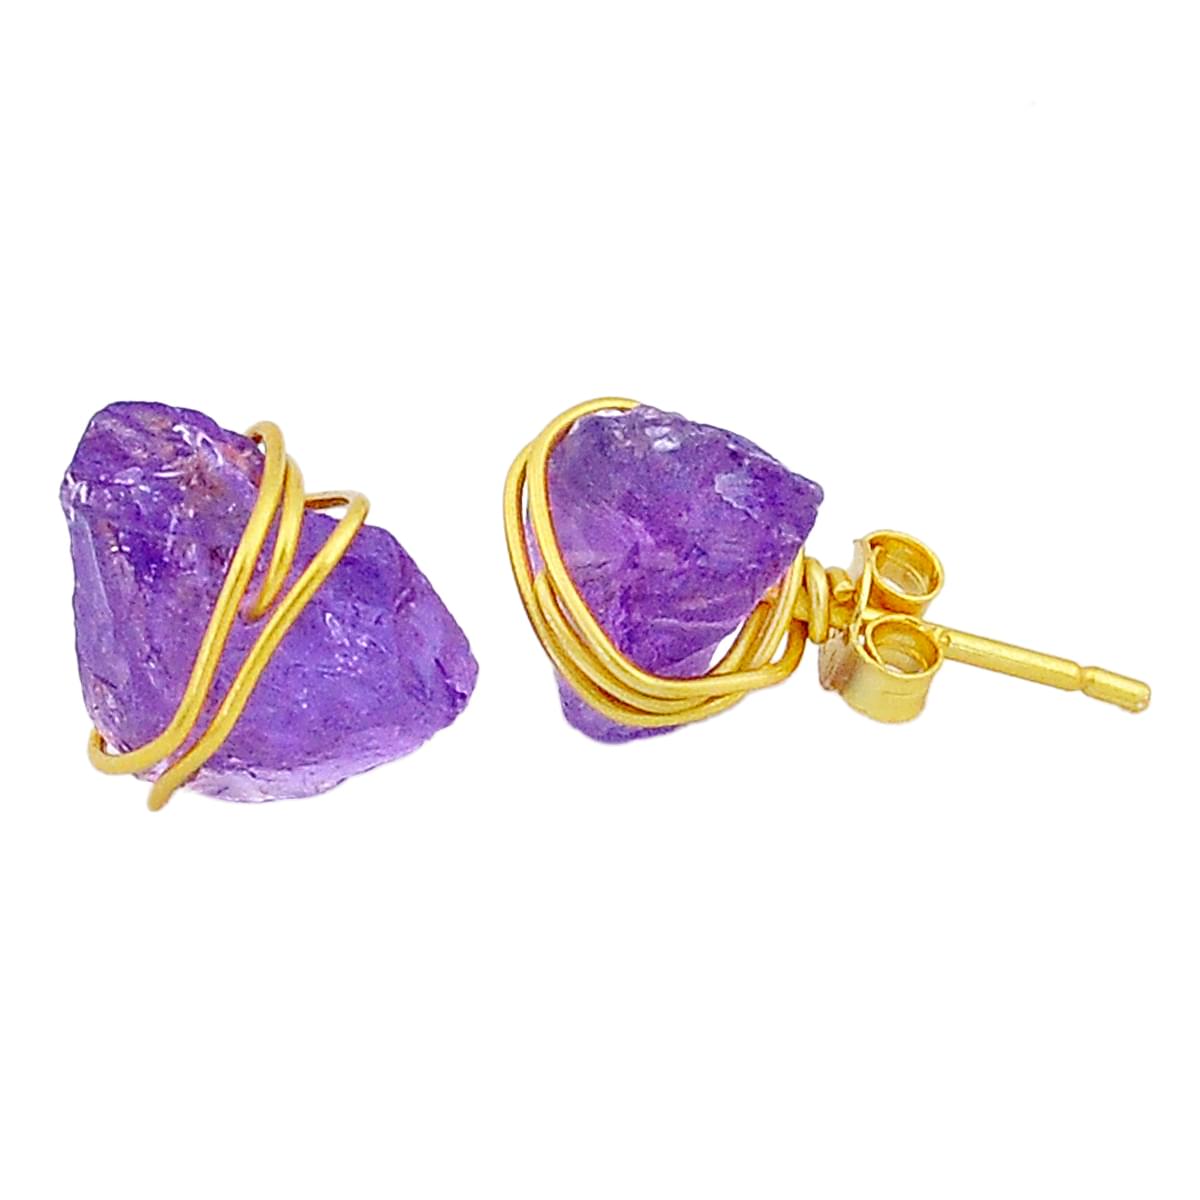 A pair of 925 silver gilt stud earrings set with rough amethyst, L. 1.5cm.